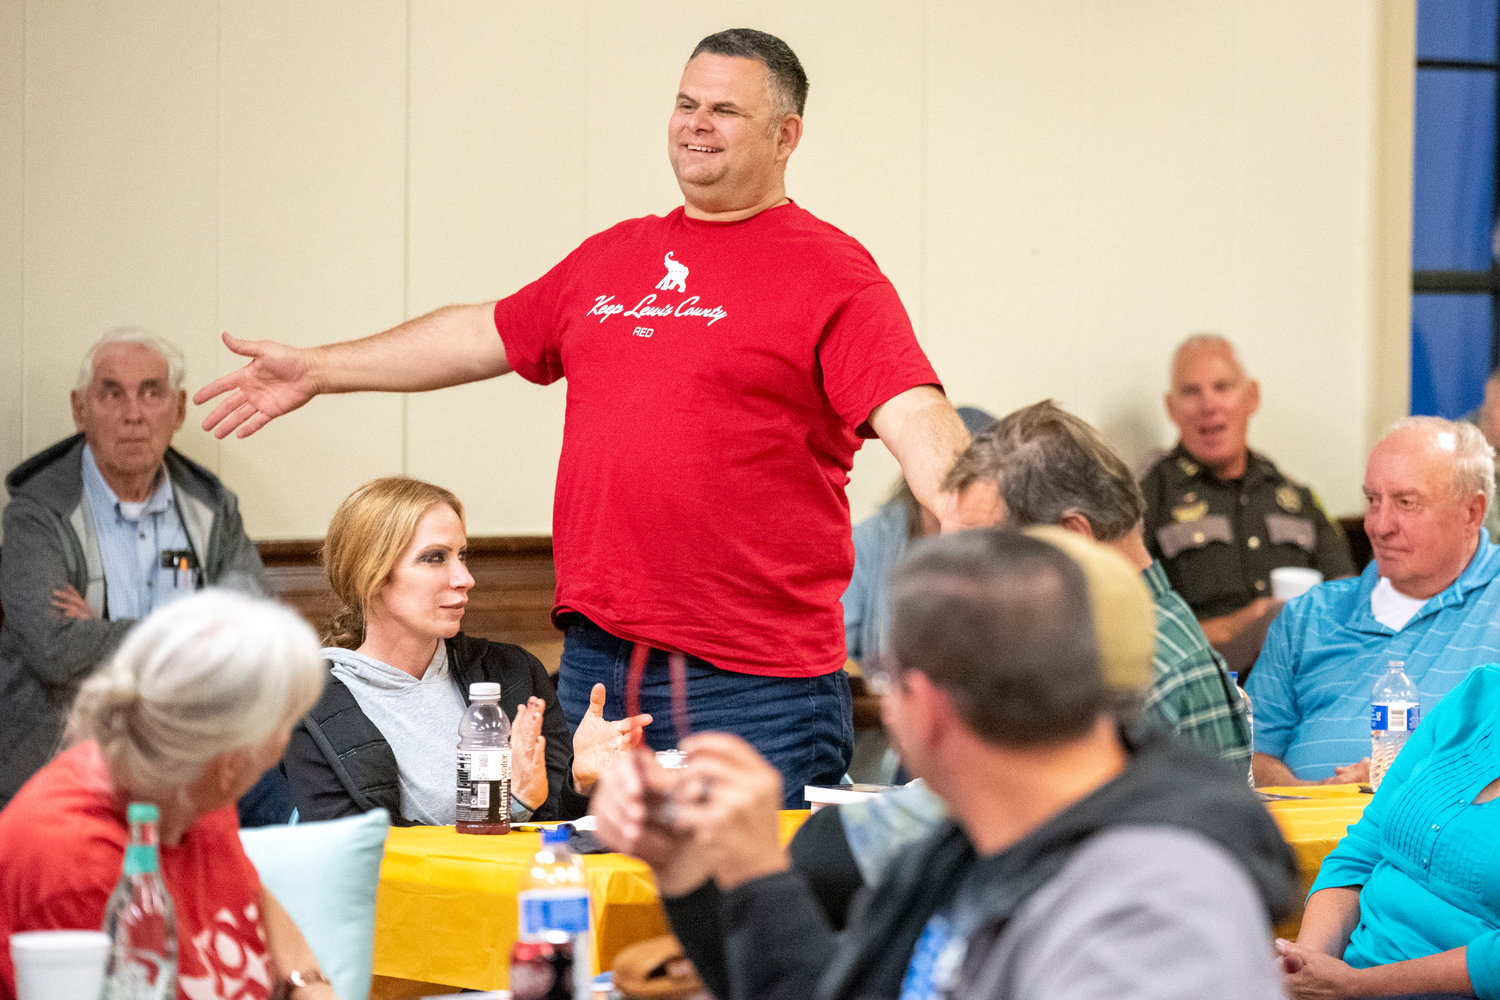 Morton Police Chief Roger Morningstar smiles and stands while sporting a shirt that reads, “Keep Lewis County Red” during a Lewis County Republicans meeting on the topic of filling the District 3 Commissioner position.